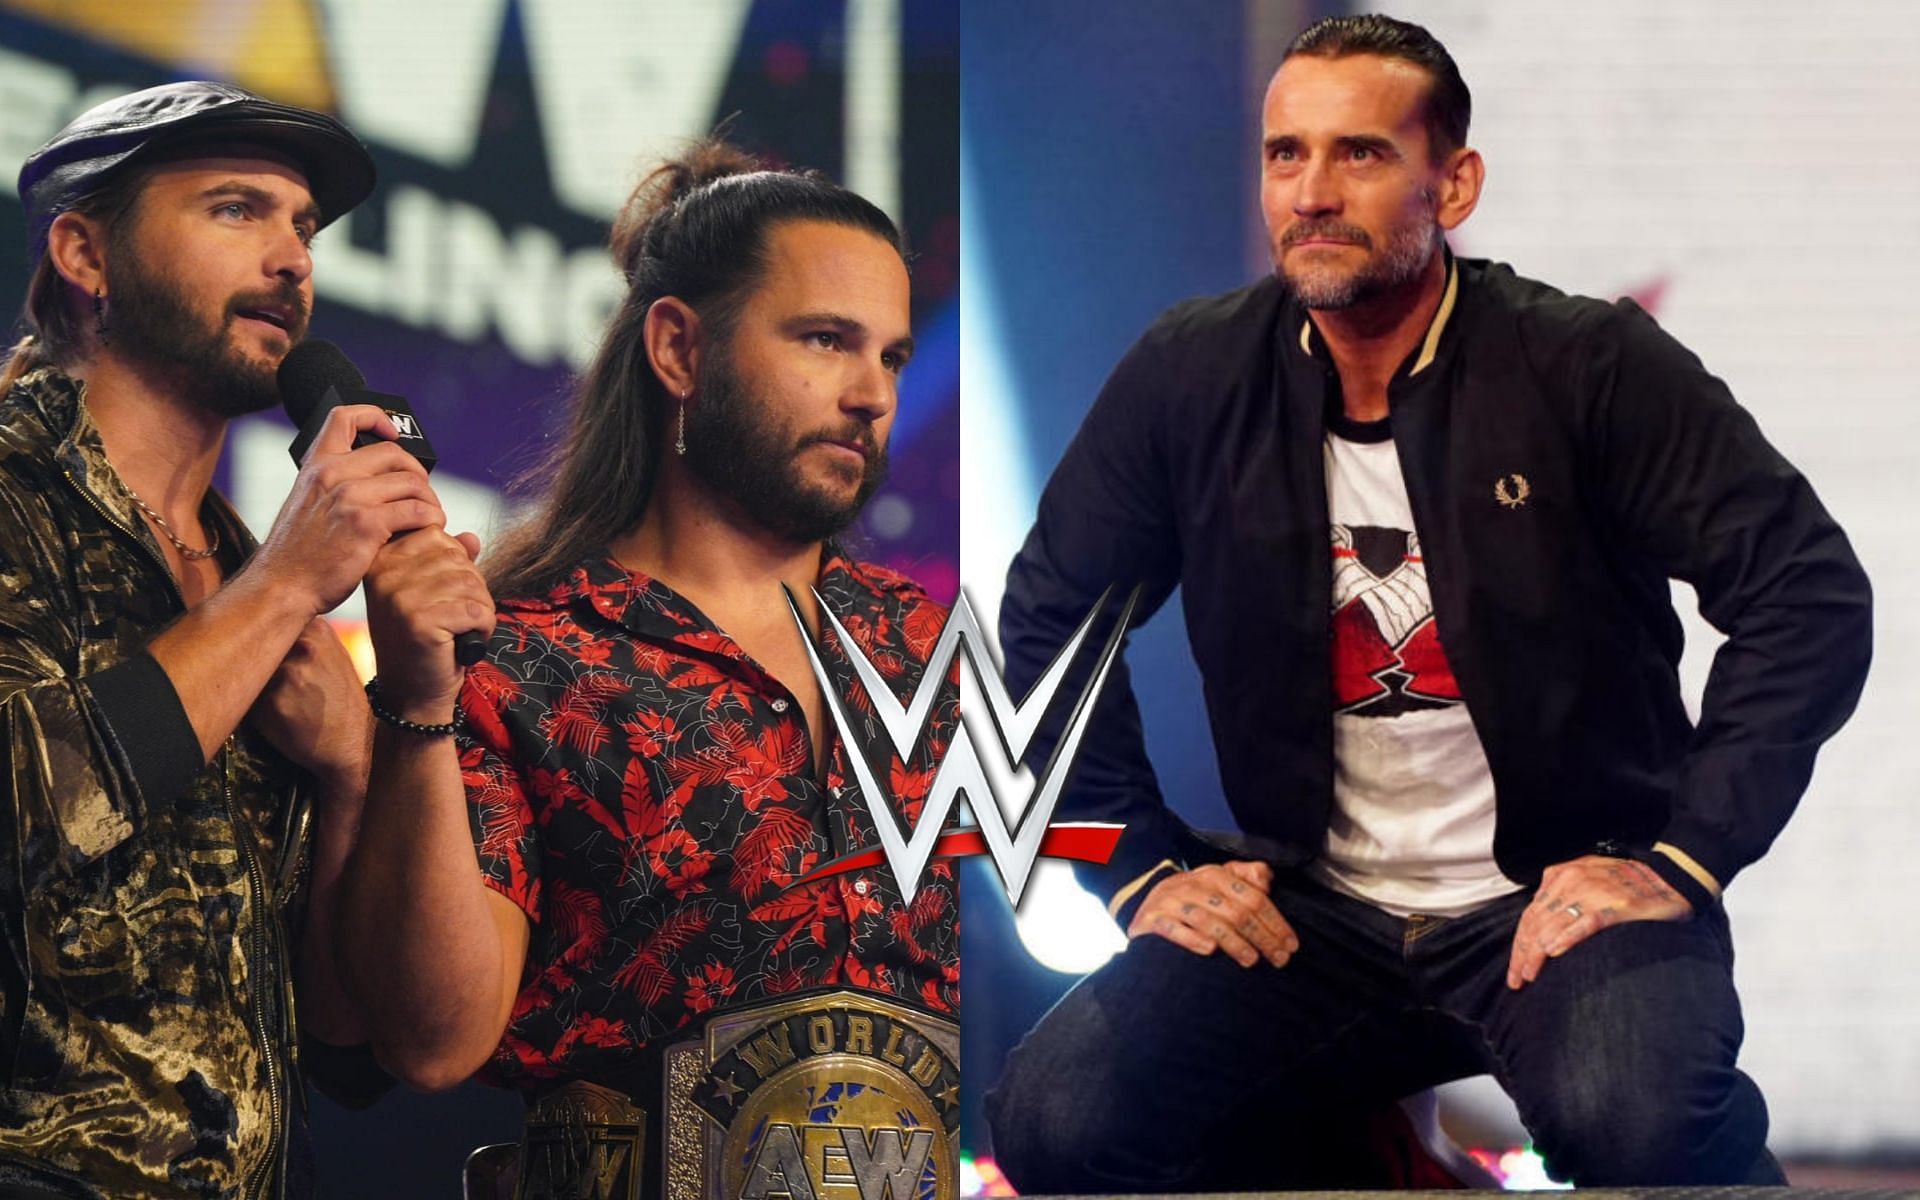 A WWE legend reacted on the &quot;CM Punk owns The Young Bucks&quot; sign on AEW Dynamite.